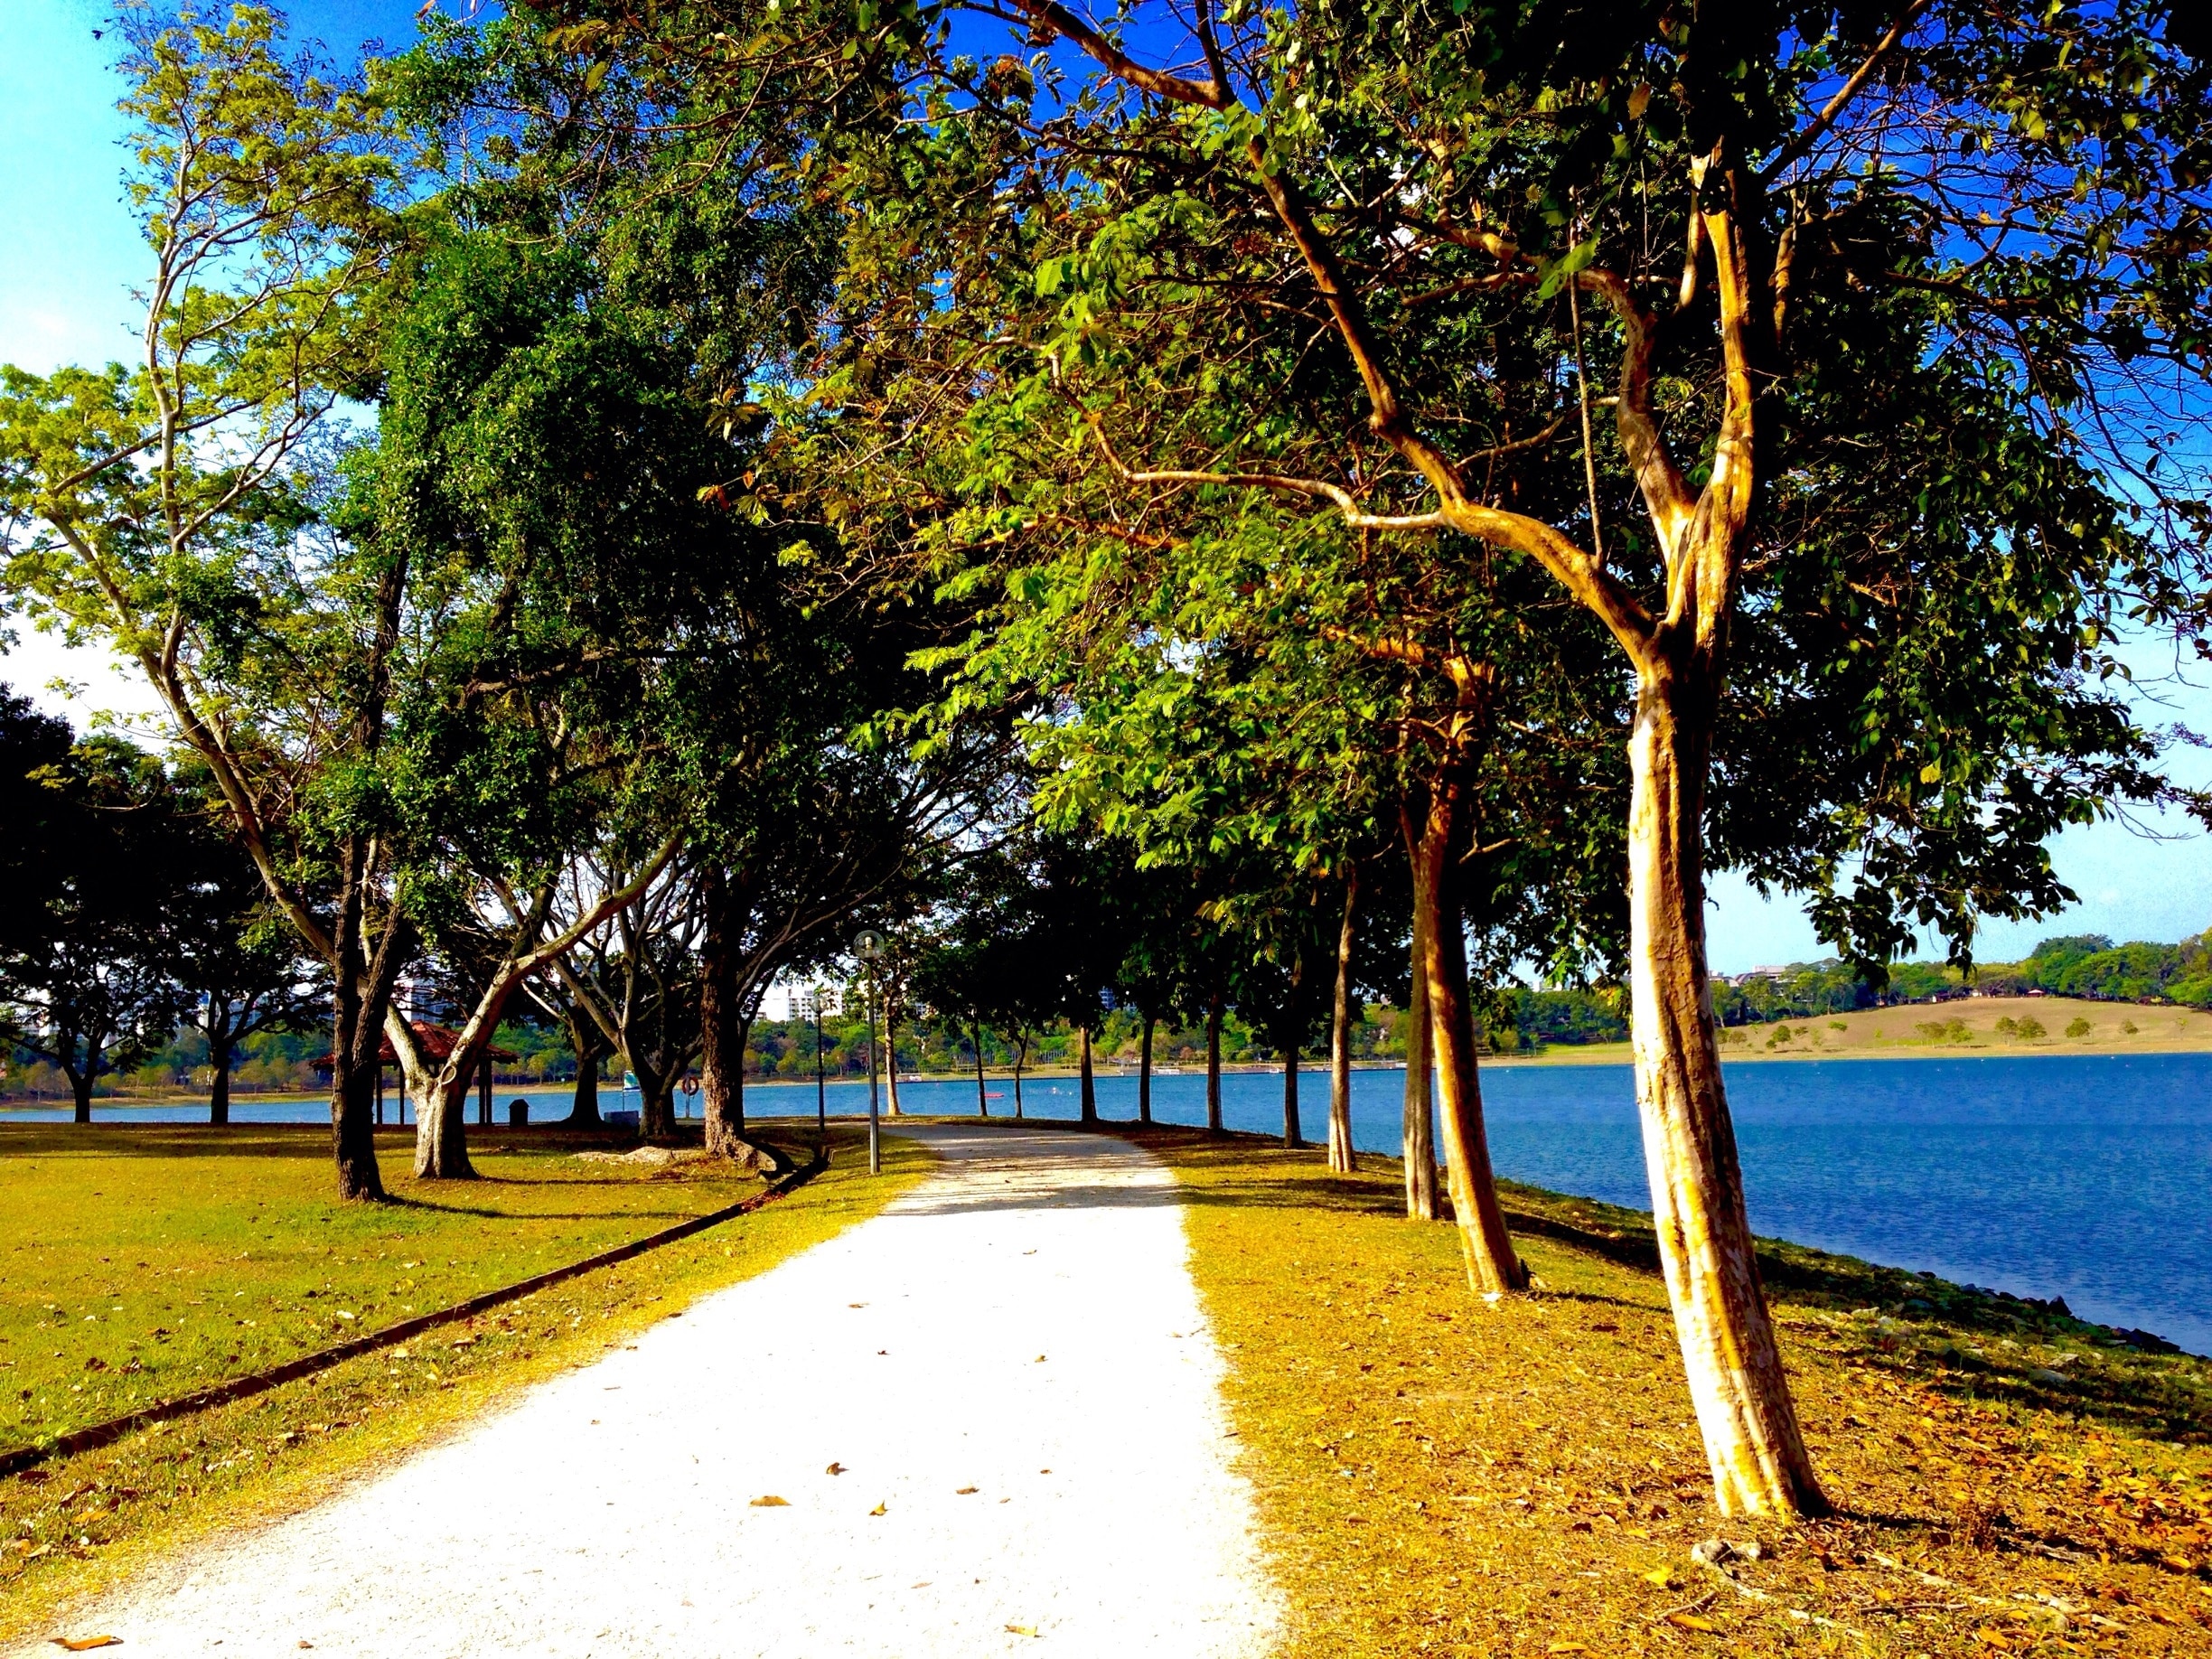 Tree lined path makes this an ideal place to go for a walk. #bvsblue